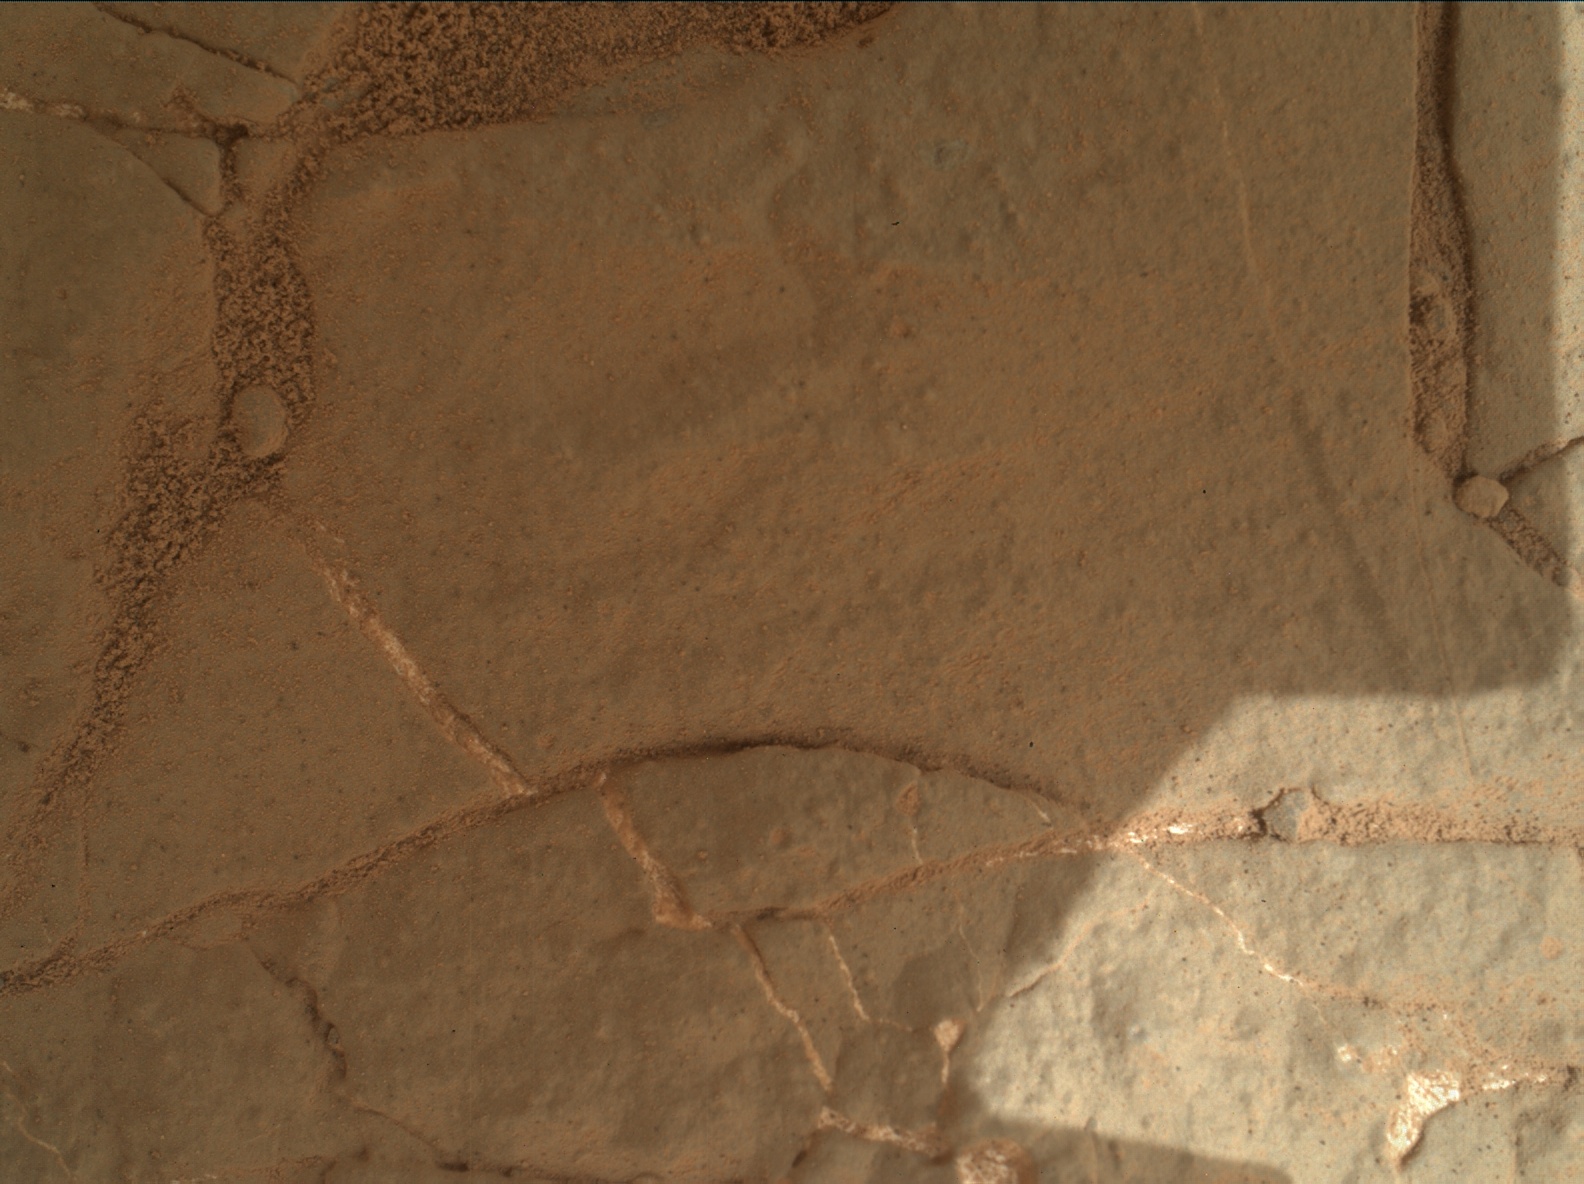 Nasa's Mars rover Curiosity acquired this image using its Mars Hand Lens Imager (MAHLI) on Sol 161